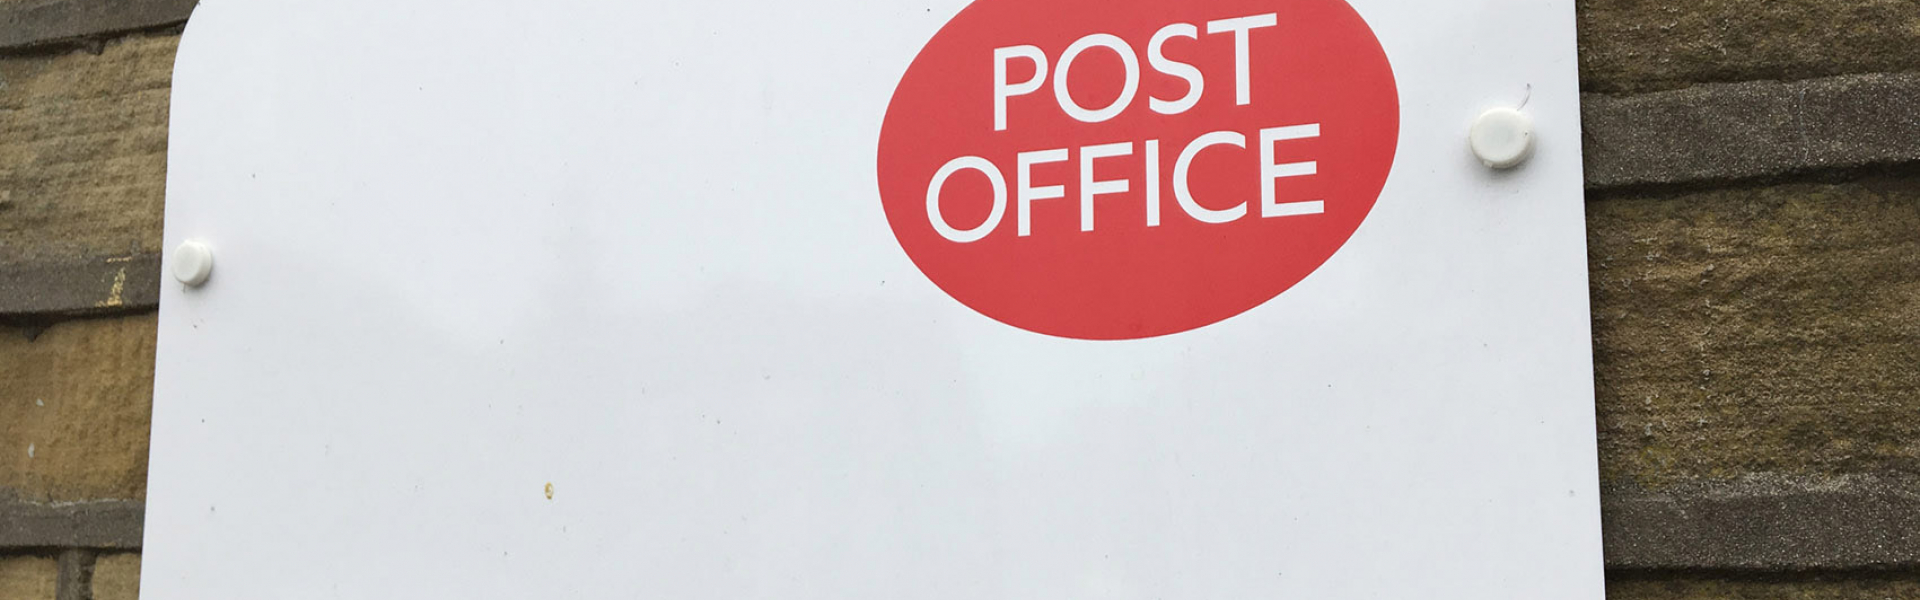 New post office 'pops-up' to serve Meads residents after assiduous work by Conservative councillors